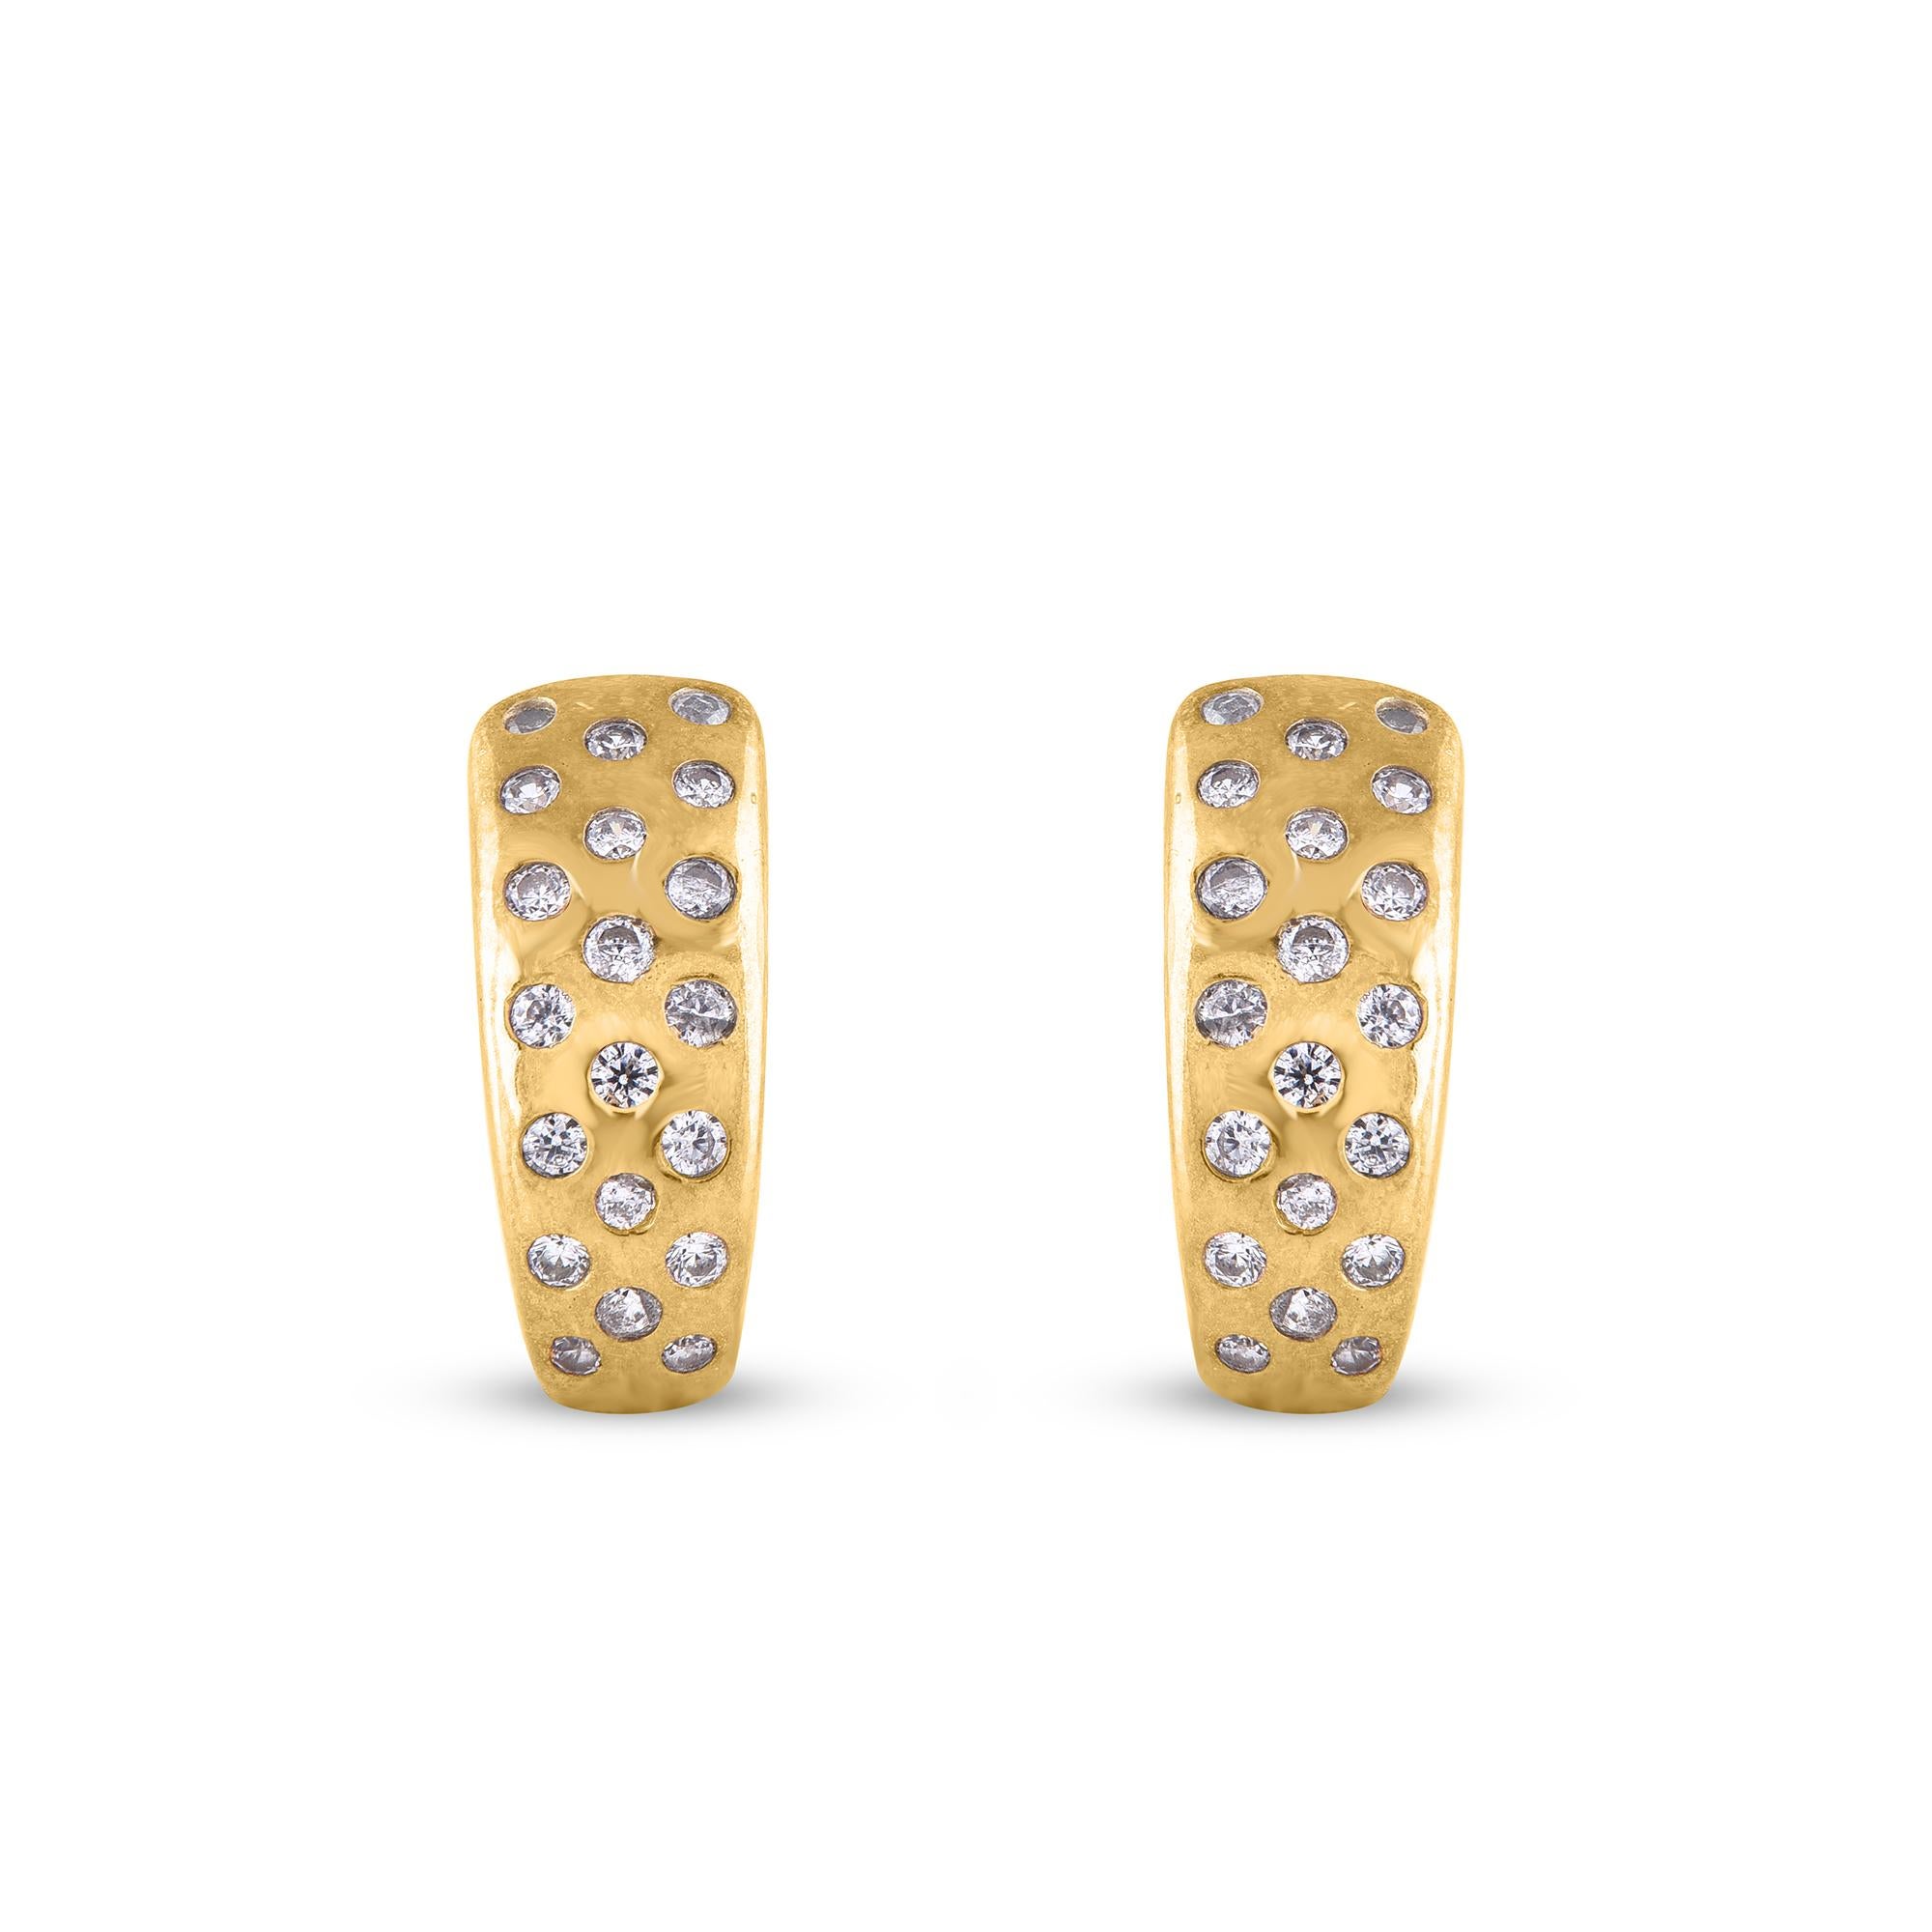 Adorn your casual wear with extra glitz when you put on these floral design stud earrings. Expertly crafted in 14 K Yellow Gold, earring is cleverly filled with 40 round diamond set in flush setting and shimmers in H-I color I2 clarity. Captivating